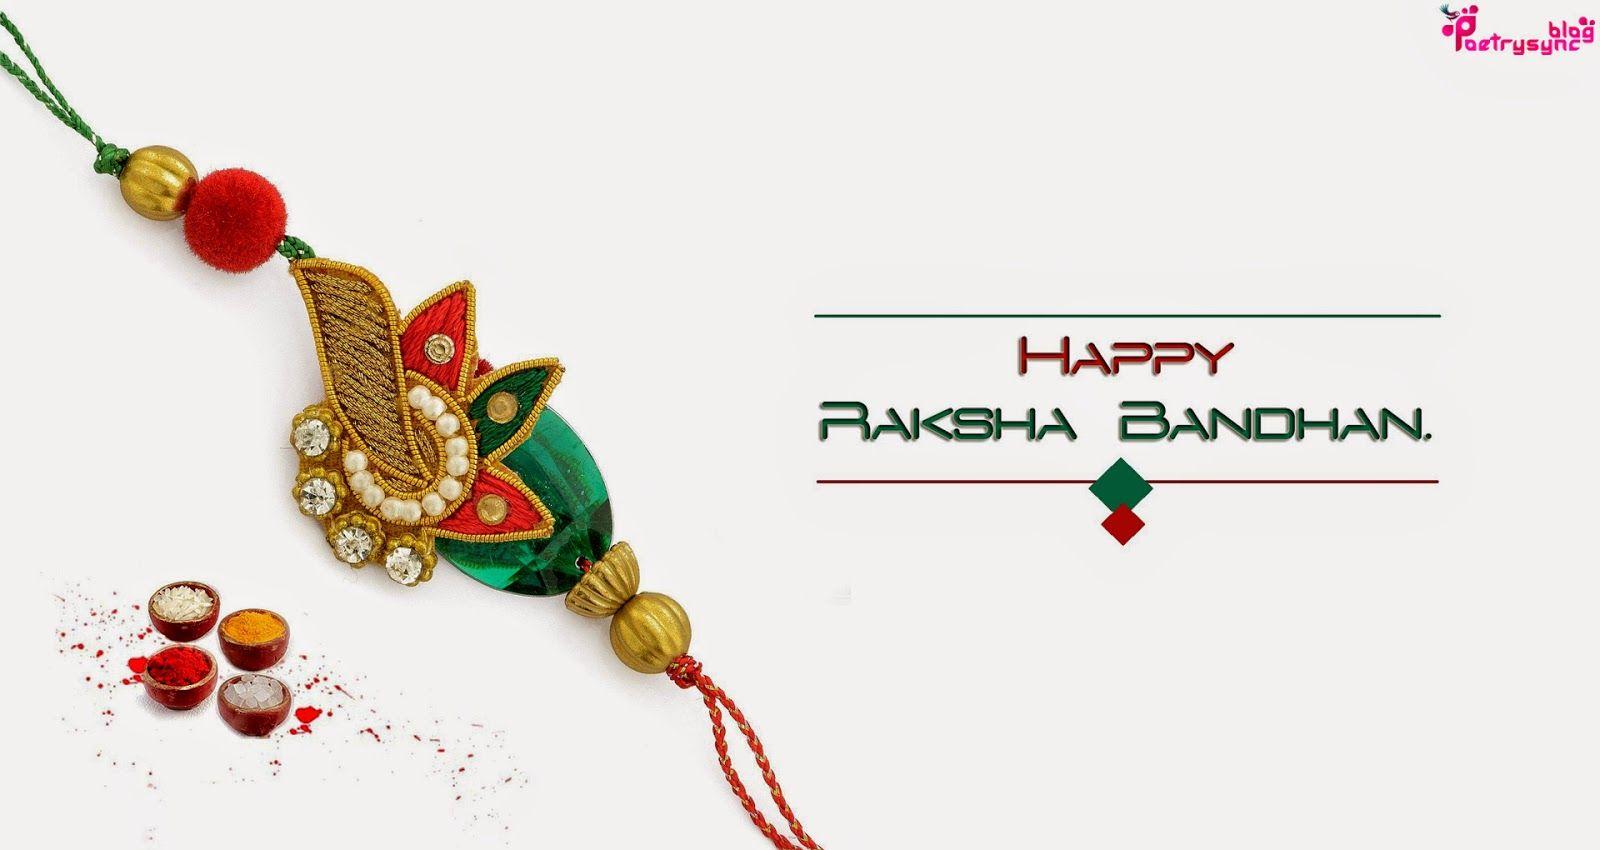 Happy Raksha Bandhan HD Wallpaper and Picture Collection. Poetry